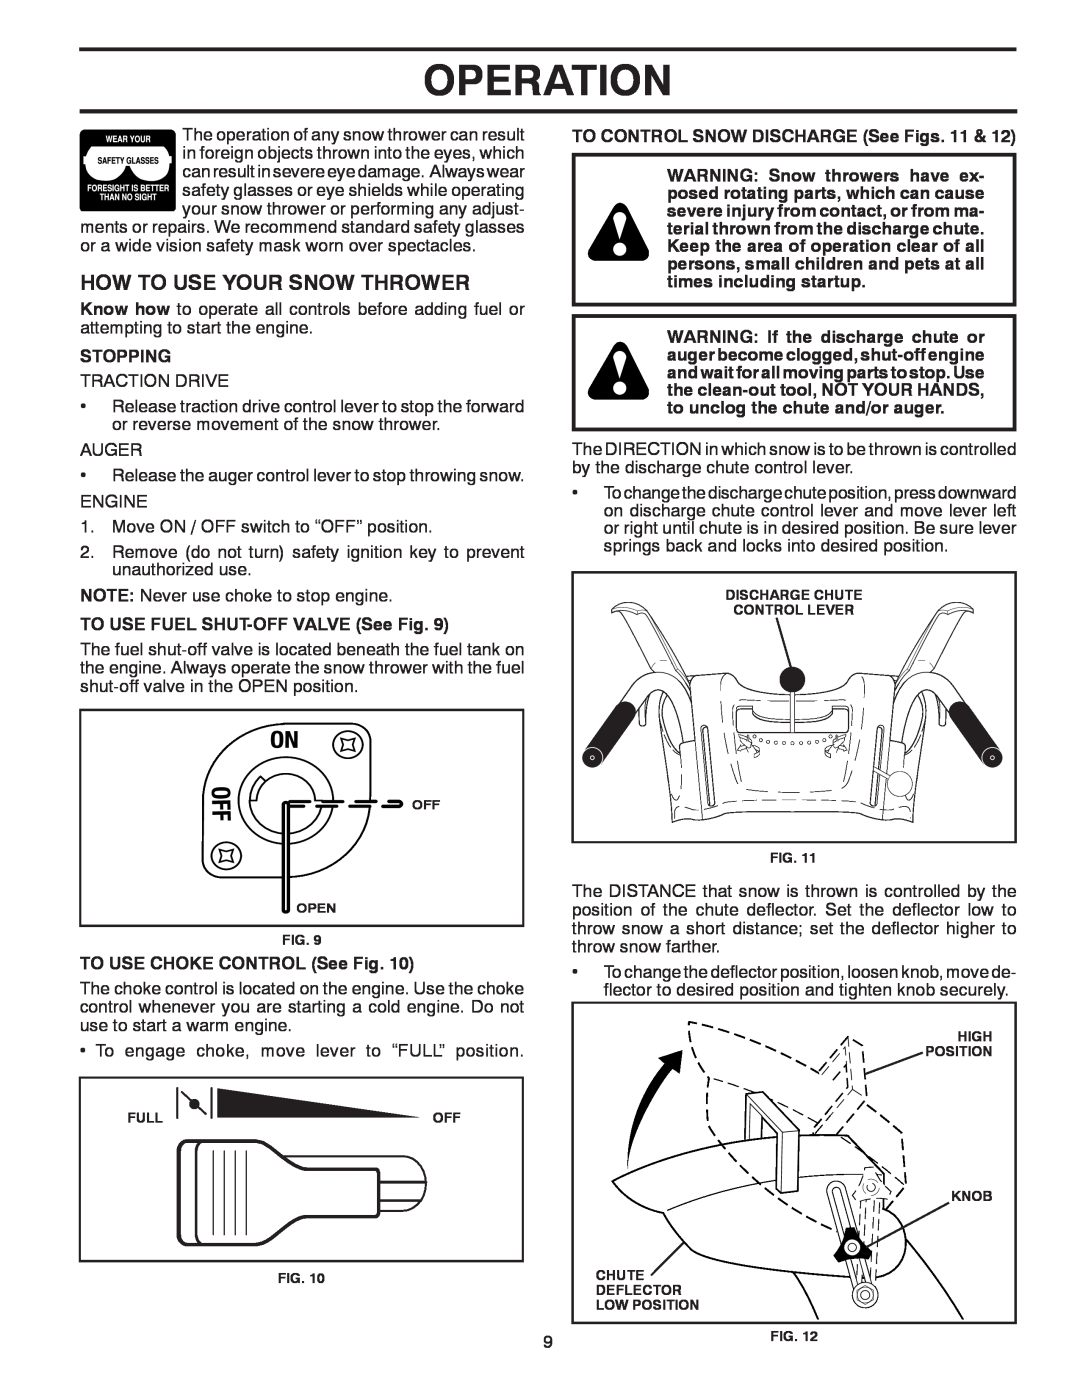 McCulloch 96192004101 owner manual How To Use Your Snow Thrower, Operation, Stopping, TO USE FUEL SHUT-OFF VALVE See Fig 